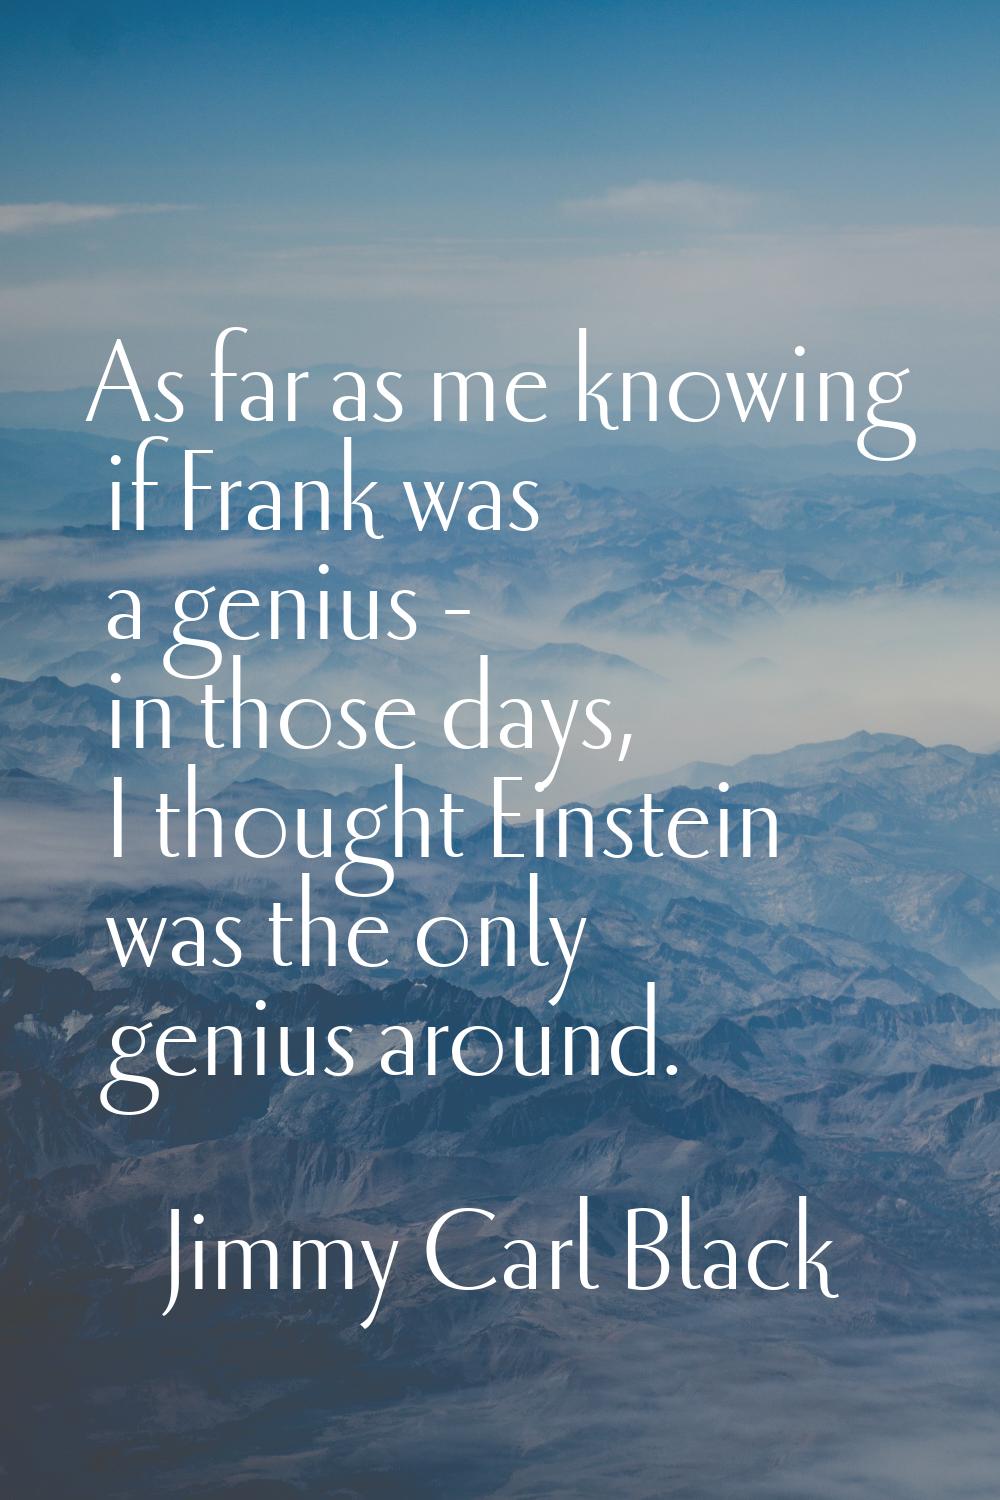 As far as me knowing if Frank was a genius - in those days, I thought Einstein was the only genius 